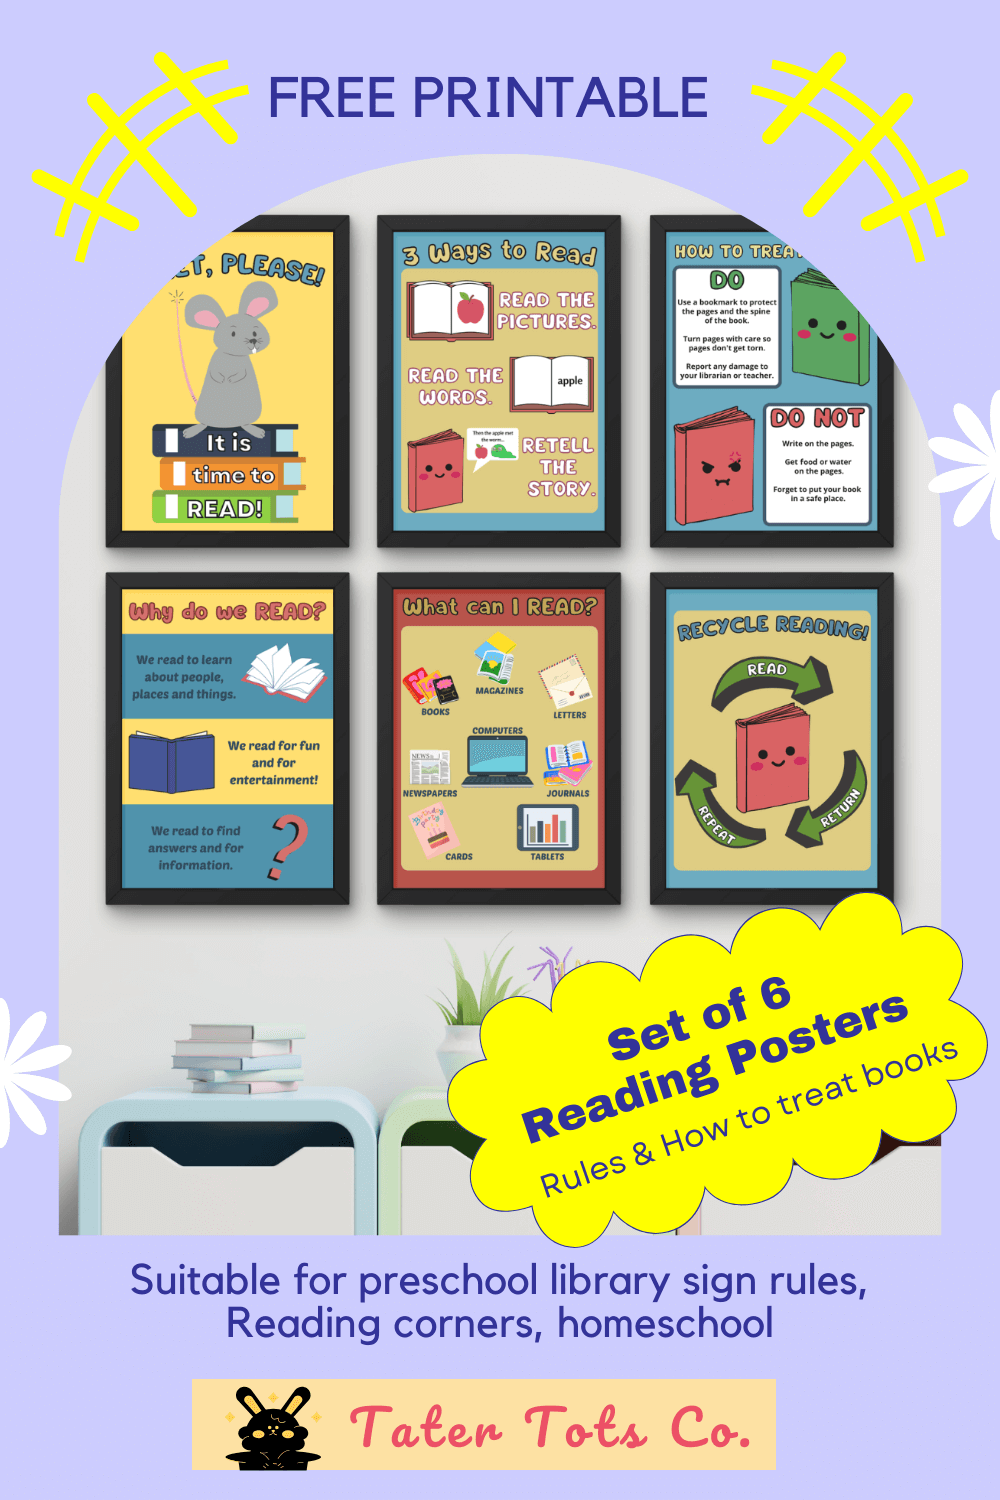 Transform Your Reading Space with a Free Set of 6 Preschool Reading Posters 001